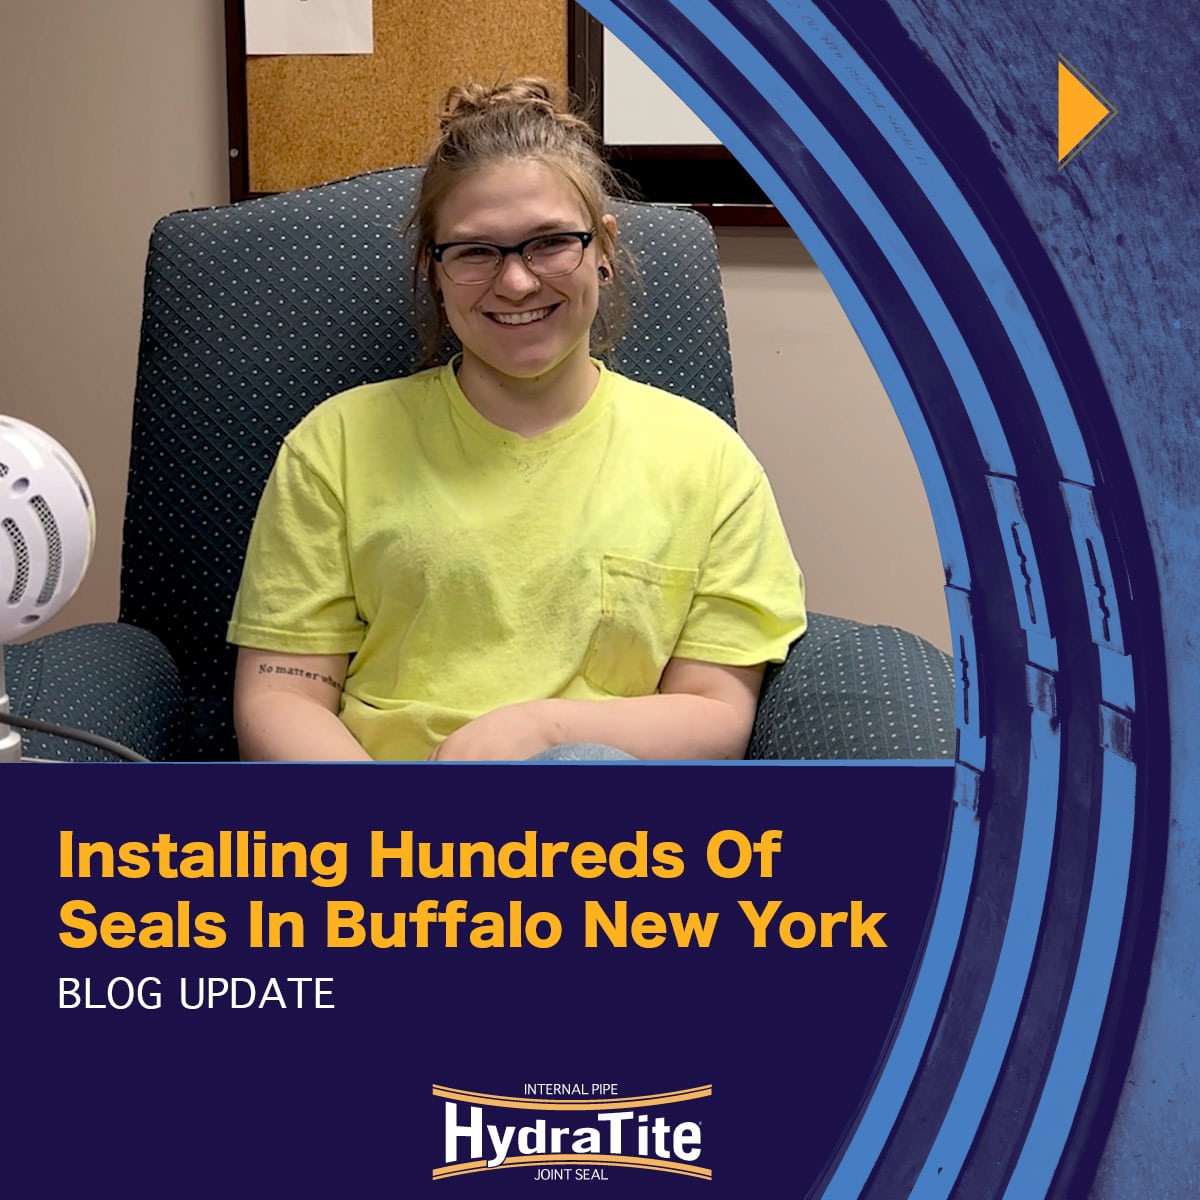 Video teaser image of Madison being interviewed, 'Installing Hundreds Of Seals In Buffalo New York'.